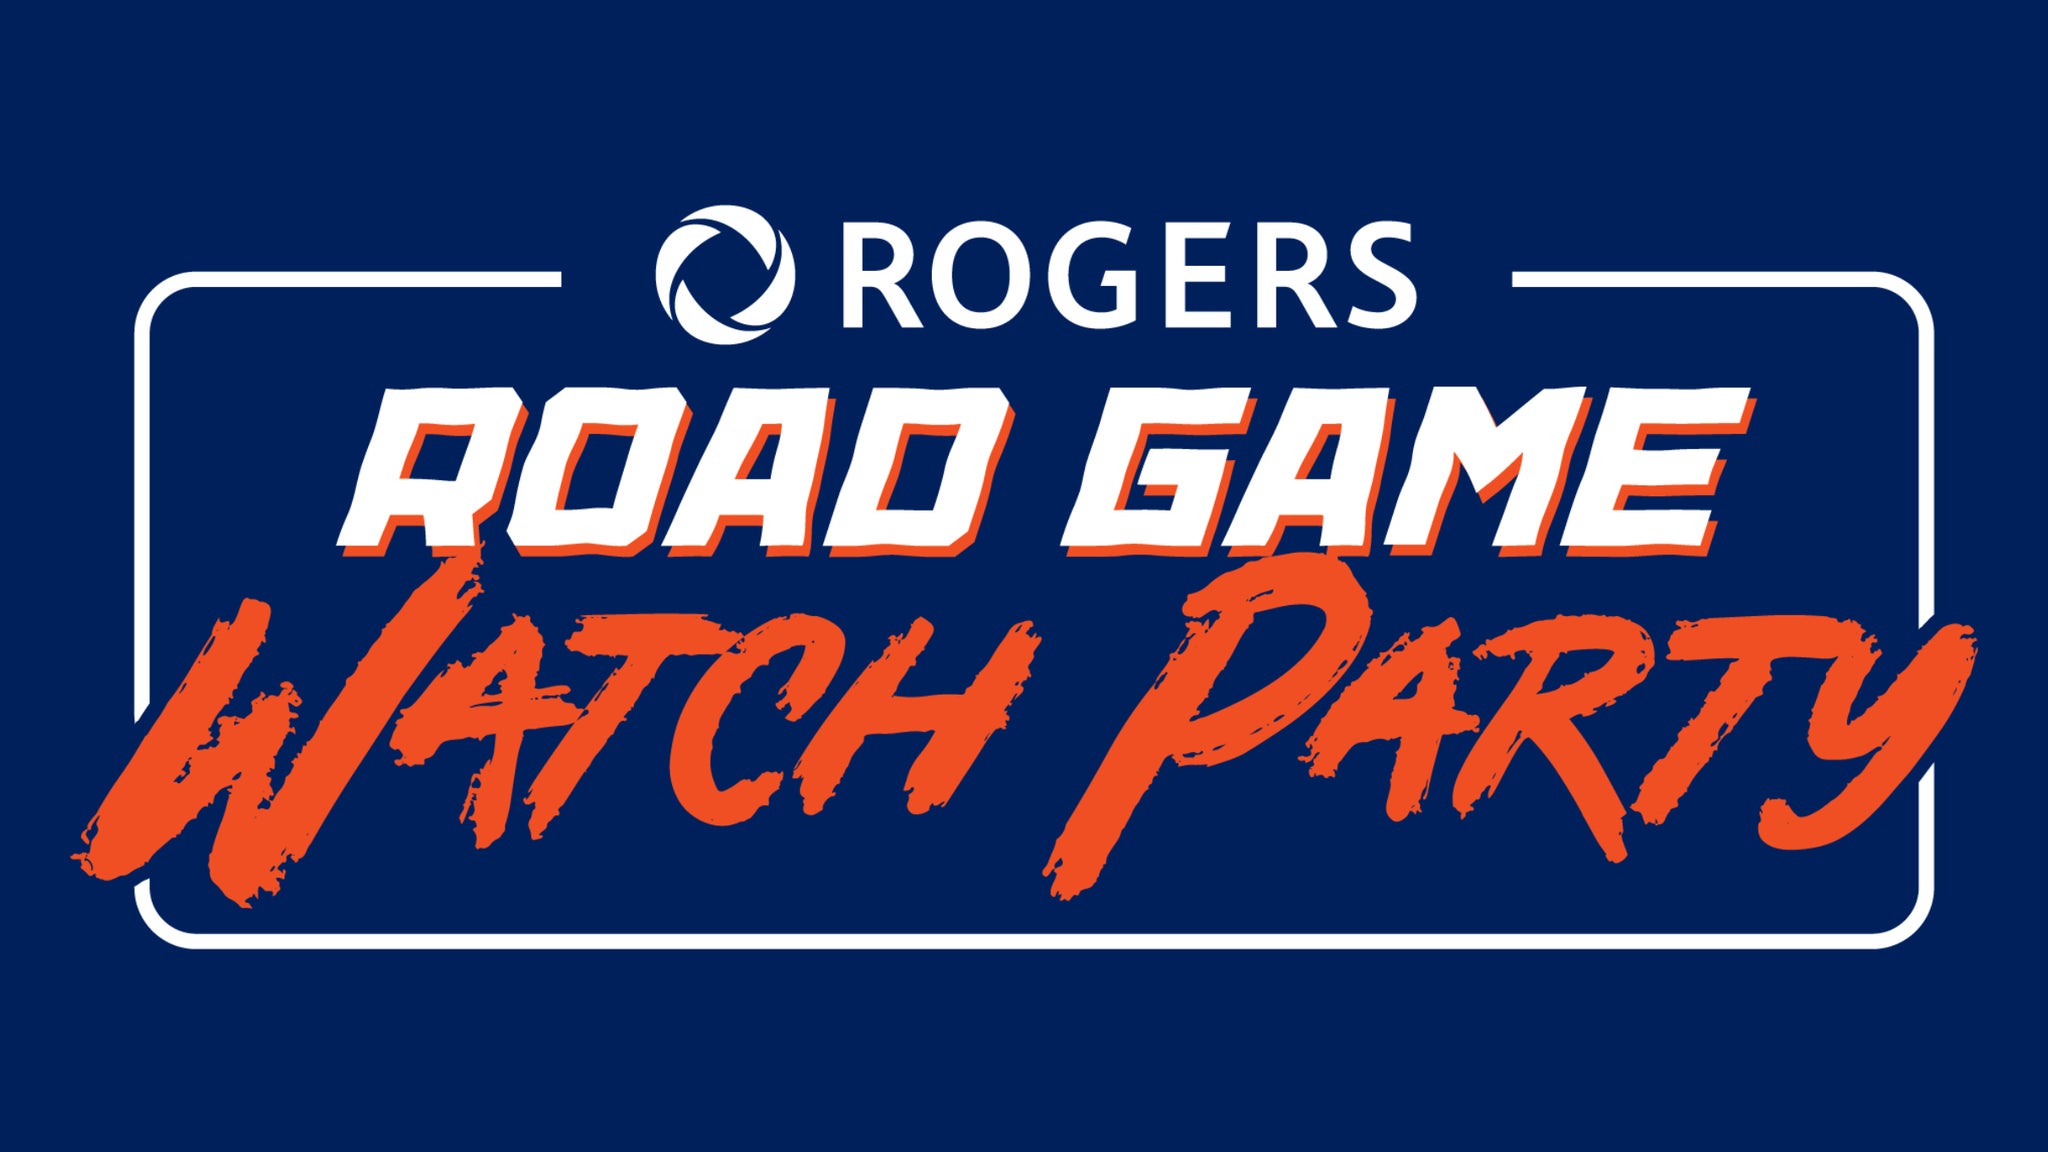 Oilers Road Game Watch Party - Edmonton Oilers v. Canucks